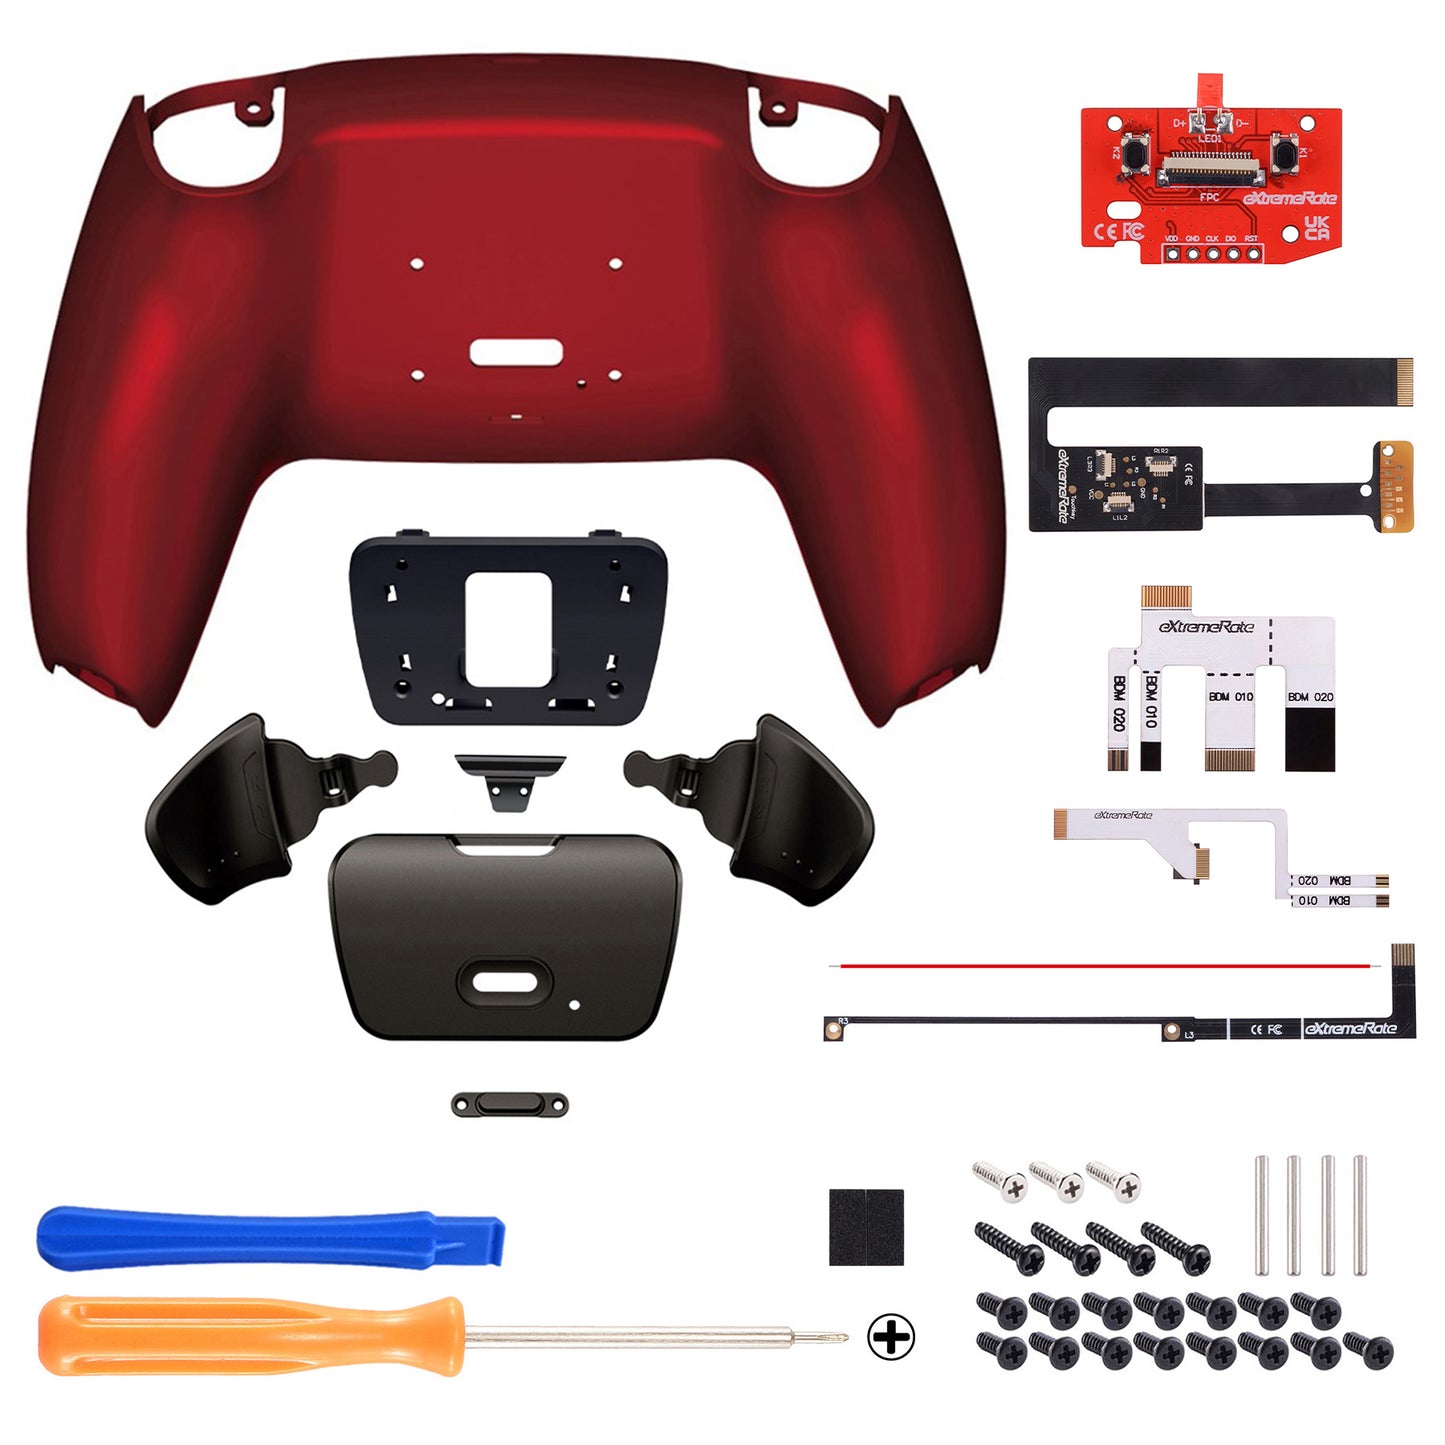 eXtremeRate Black Real Metal Buttons (RMB) Version RISE 2.0 Remap Kit for PS5 Controller BDM-010/020 - Scarlet Red eXtremeRate